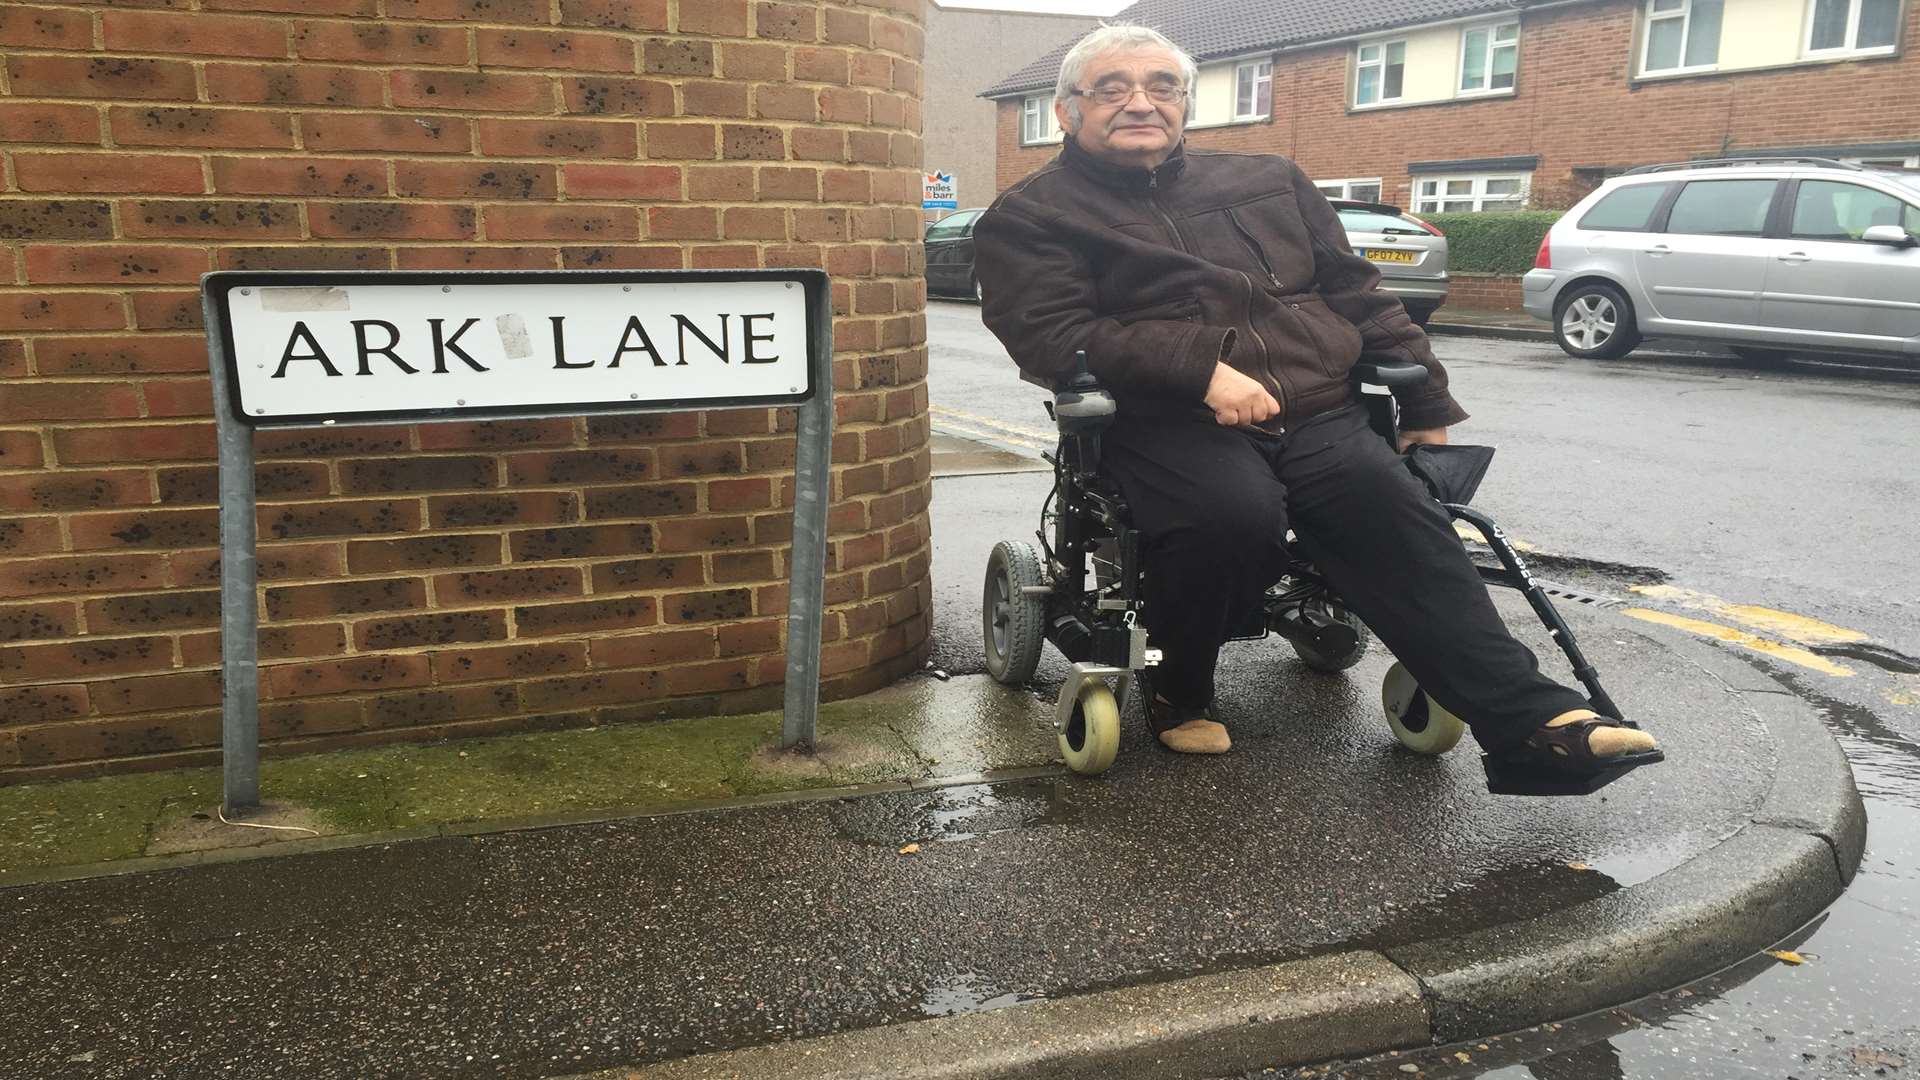 Since being forced to use a wheelchair, Cllr Ben Bano has seen the problems disabled people face getting around the town